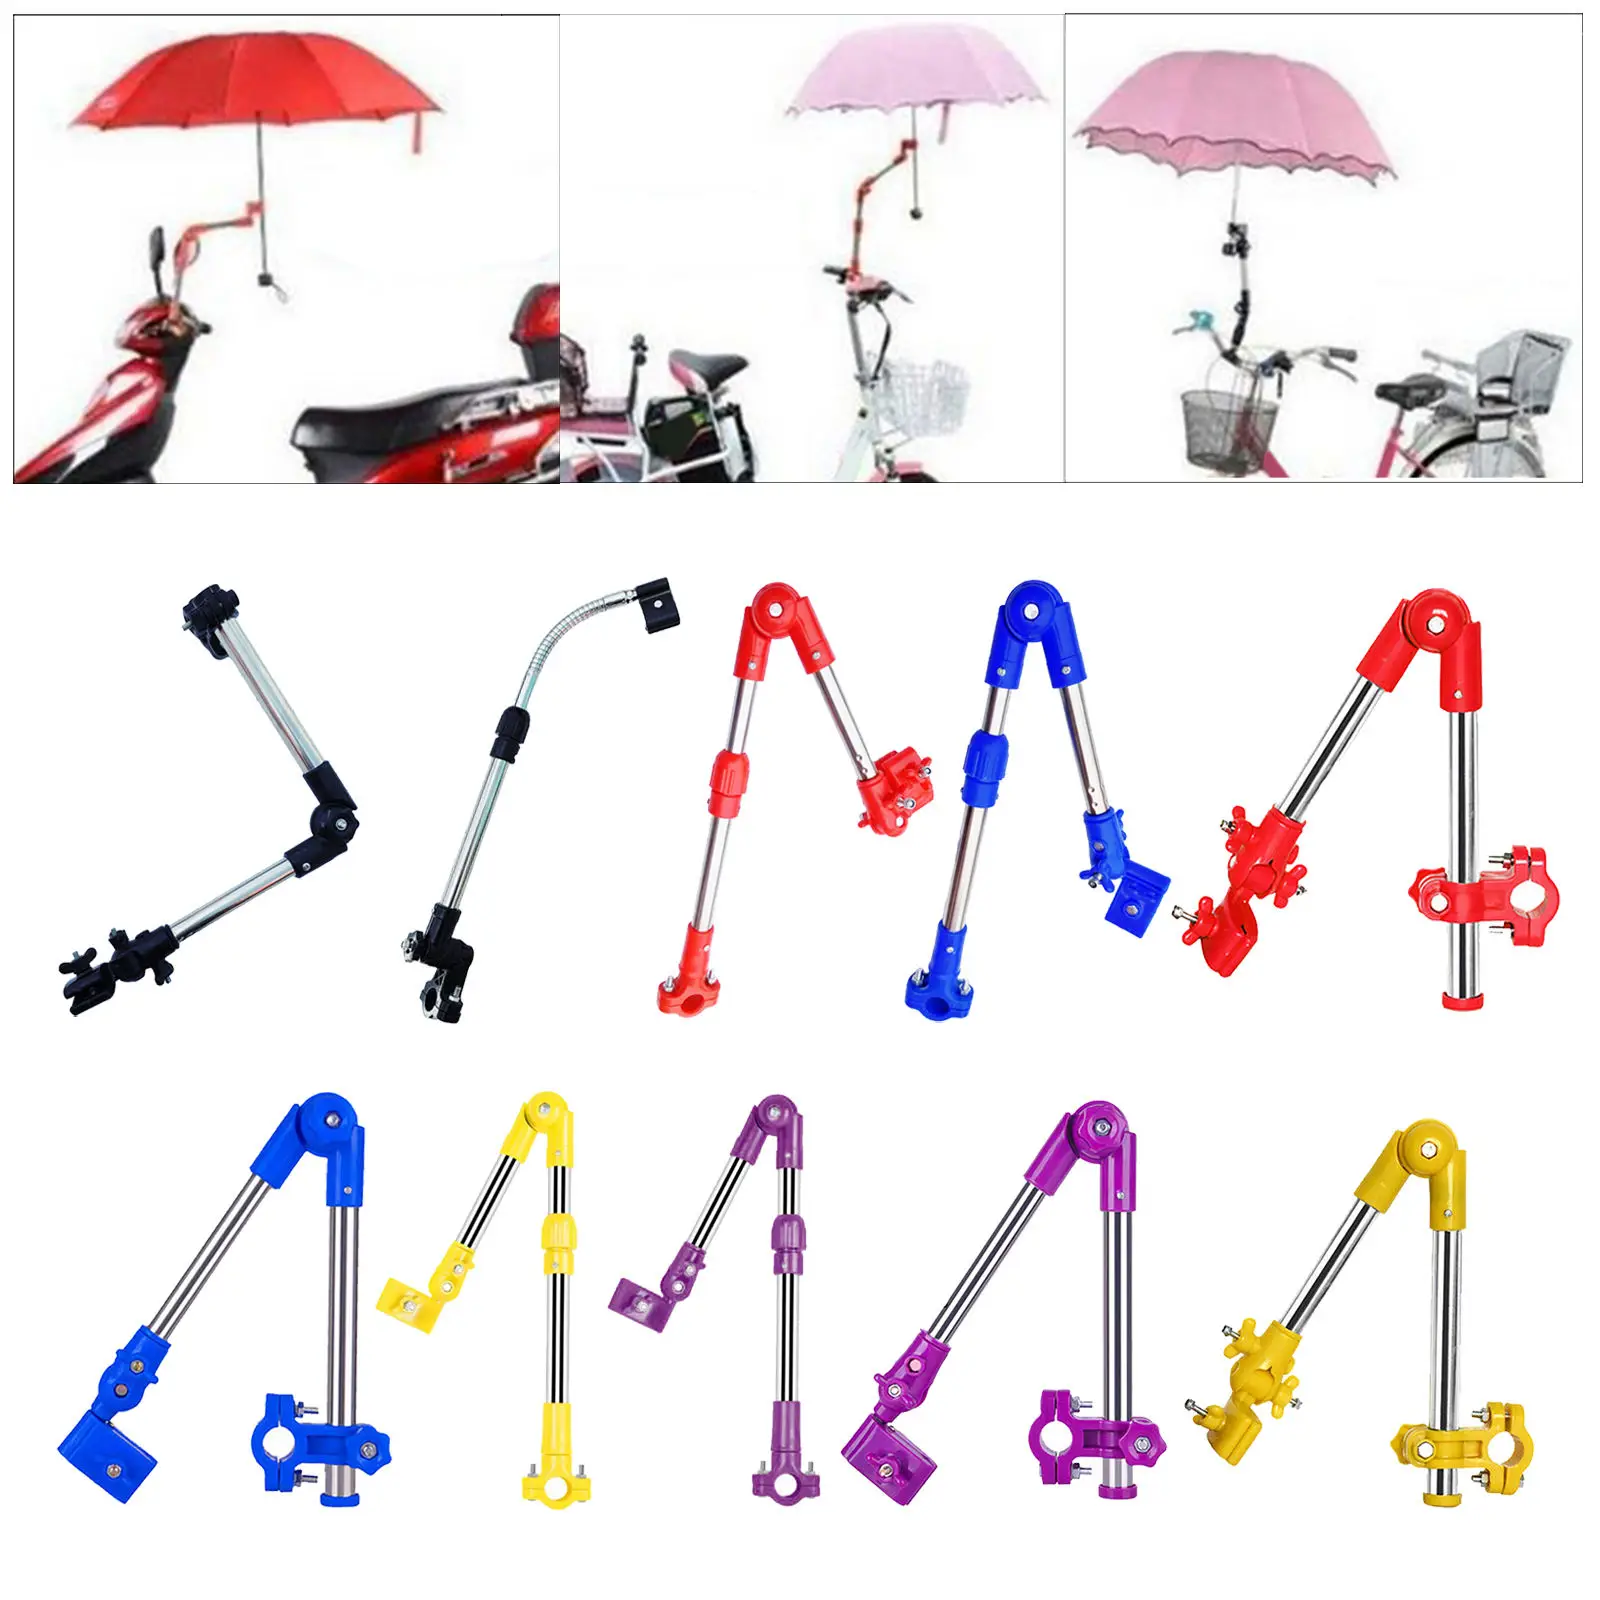 Stainless Steel Bicycle Umbrella Holder Umbrella Stand Wheelchair Stroller Folding Umbrella Easy To Install and Remove